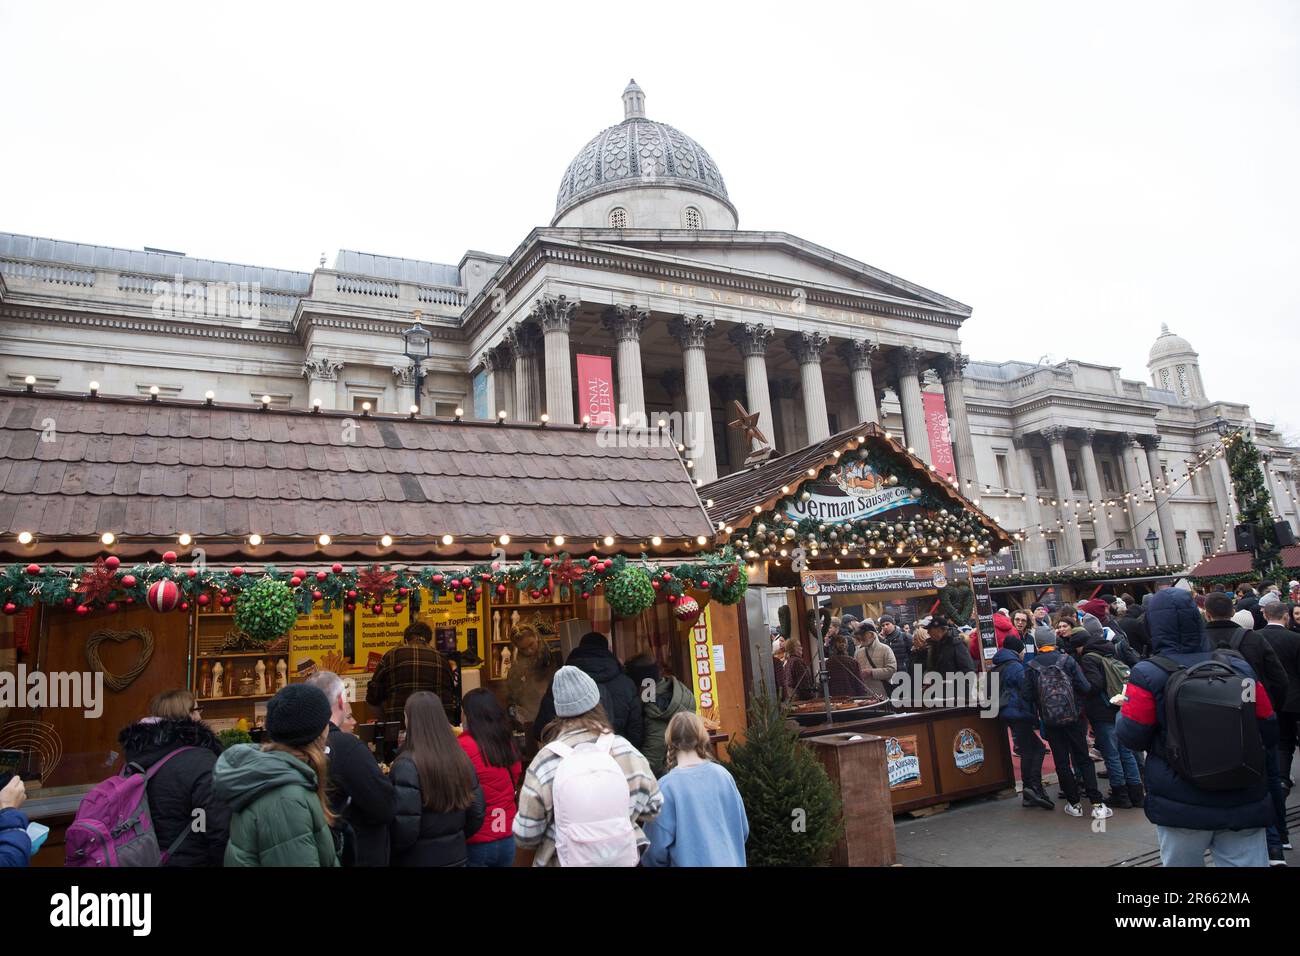 Christmas markets are seen in Trafalgar Square, central London. Stock Photo